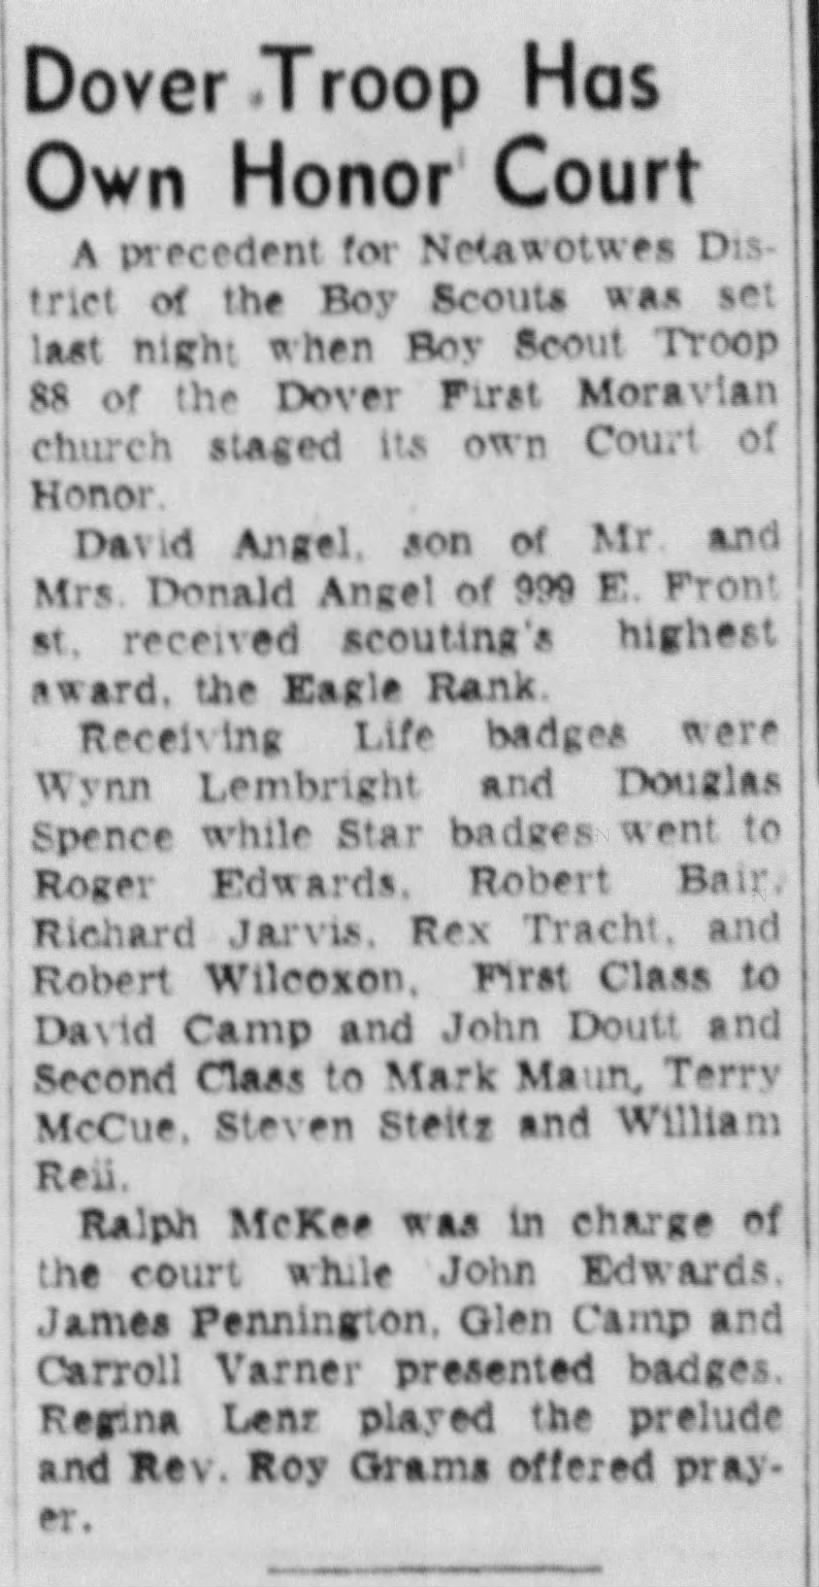 Netawotwes District of the Boy Scouts, Troop 88 Honor Court 17 Sep 1957